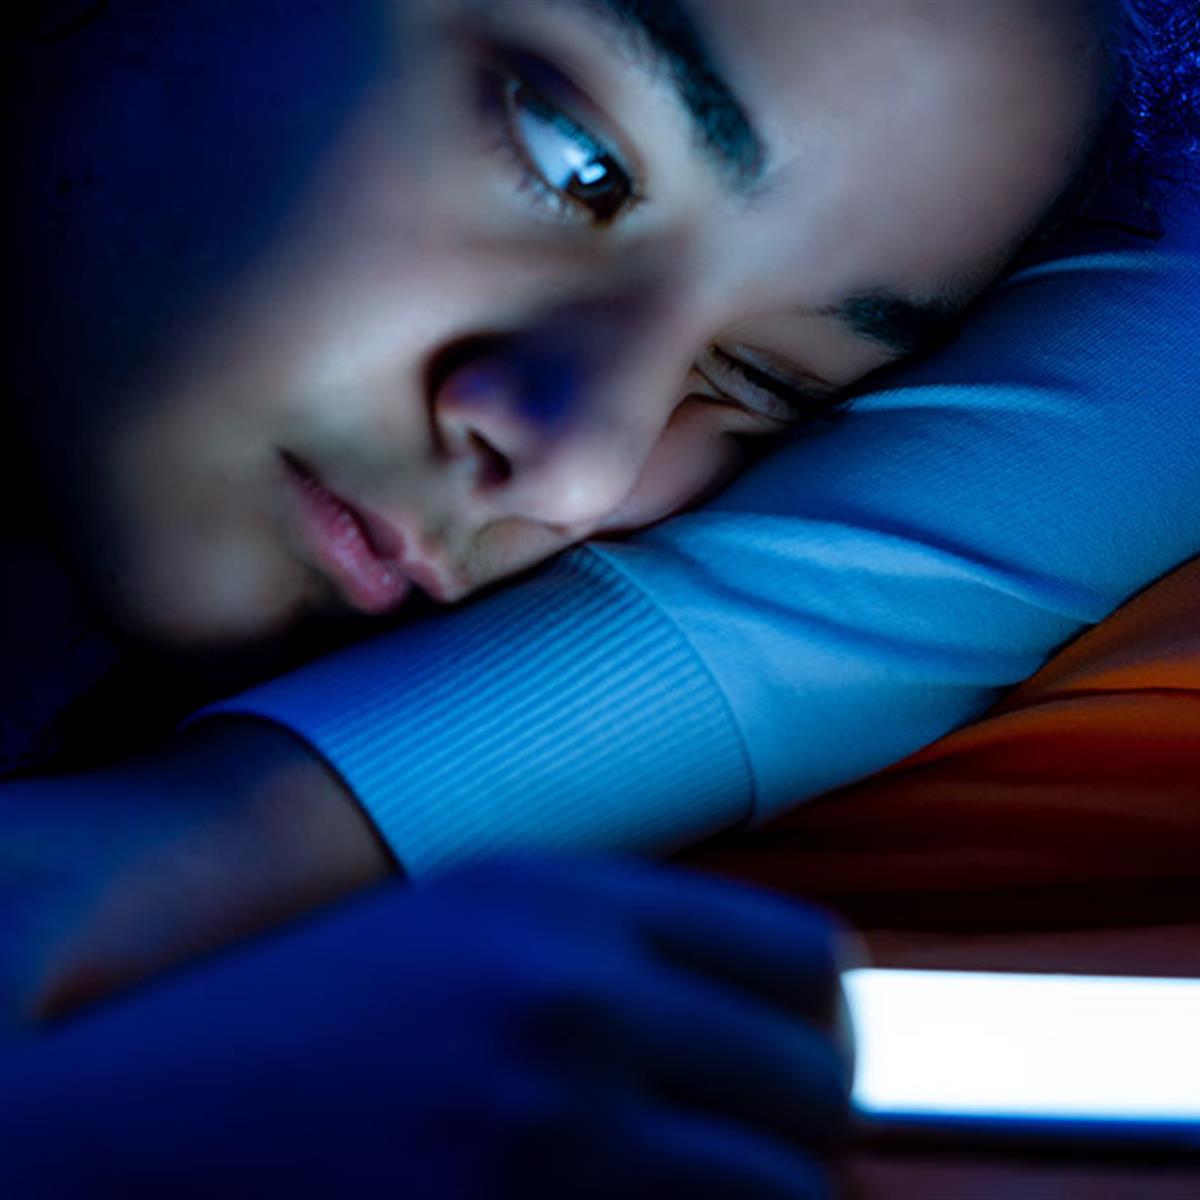 Sis Force Beeg Porn - My teen is having more trouble falling asleep at night lately. How can I  help? - HealthyChildren.org